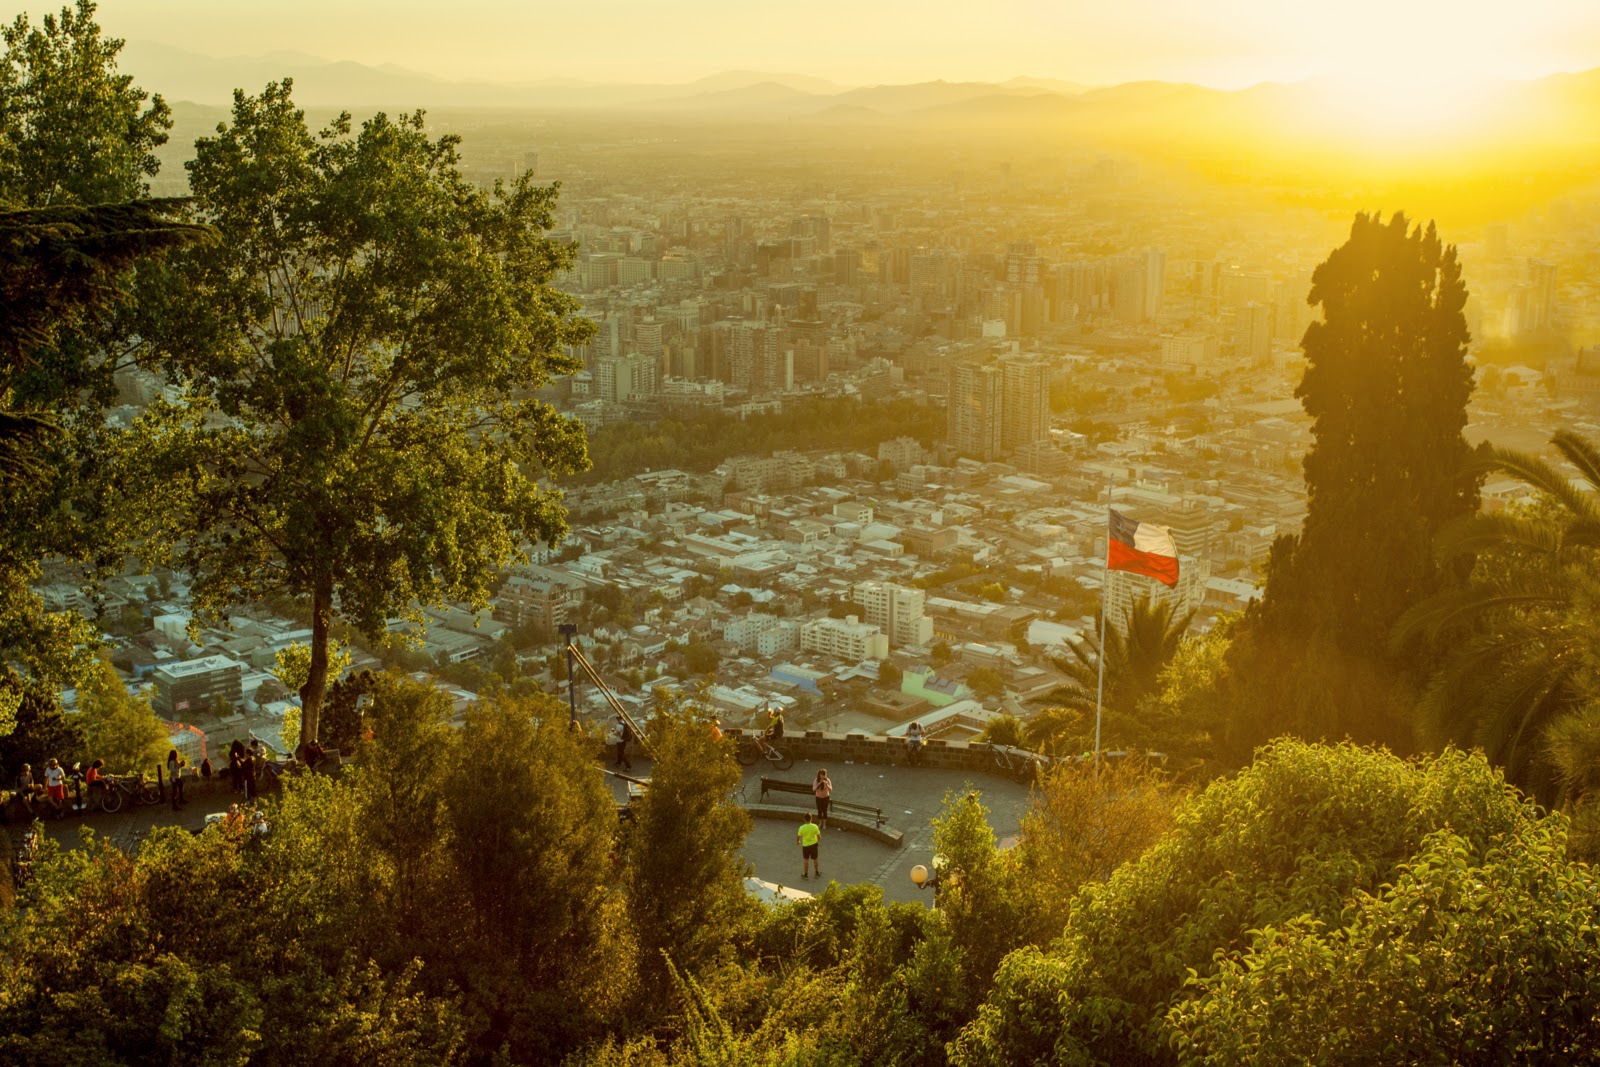 Panoramic view of Santiago de Chile during the sunset, with a flag of the country to the right